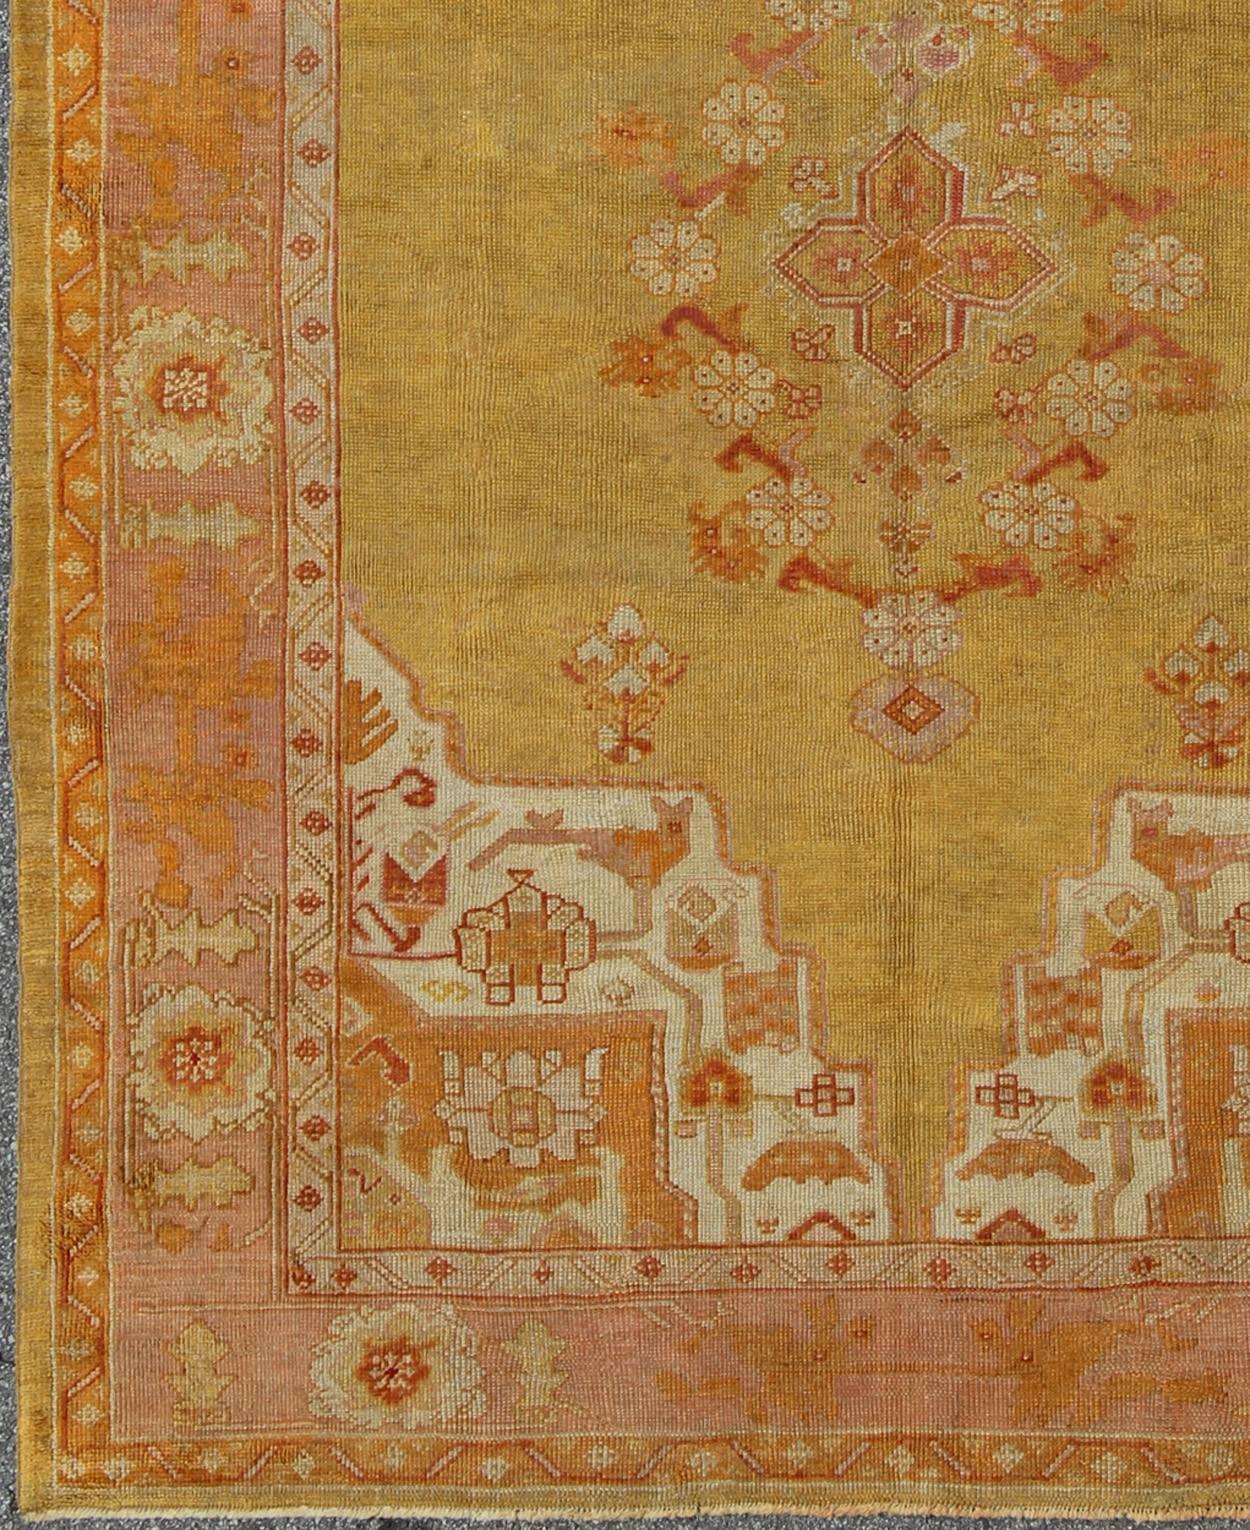 Antique Oushak rug in yellow green background, pink border, red and orange accents, Keivan Woven Arts/rug / H8-0403, Green antique Oushak 

Measures: 7'10 x 11'3.

This beautiful antique Turkish Oushak showcases an elegant combination of yellow